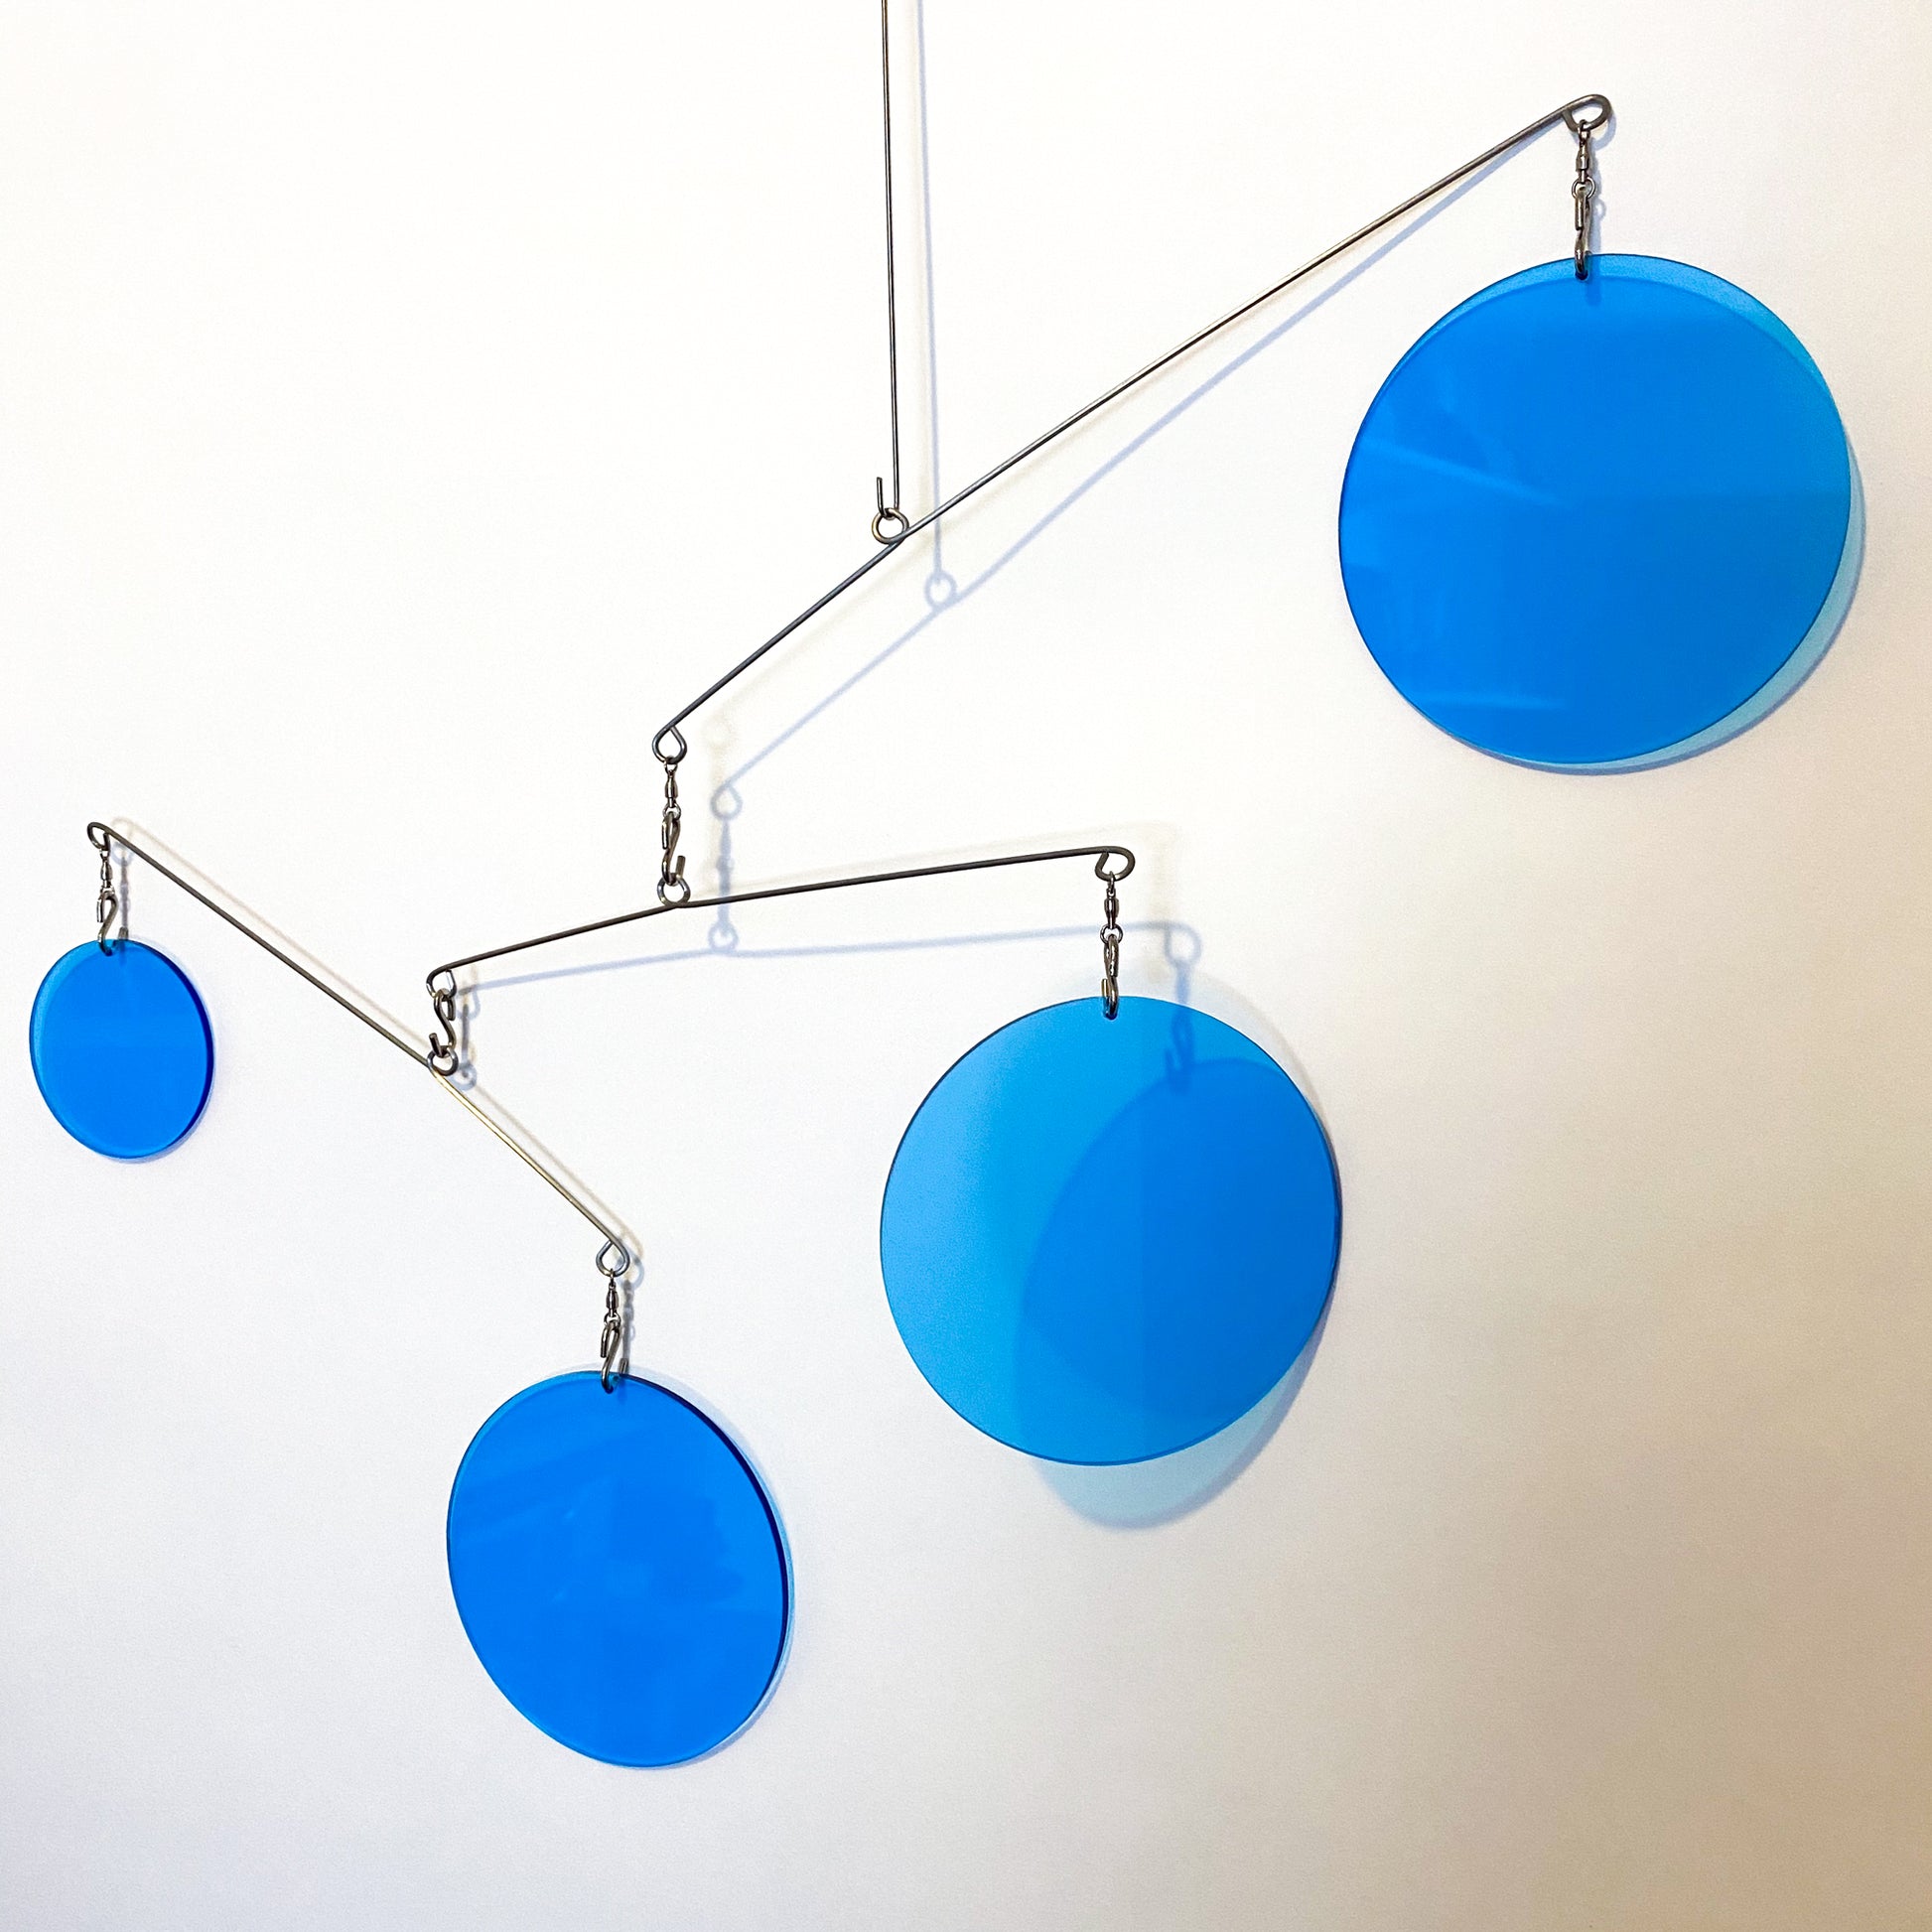 Clear Blue Acrylic Atomic Mobile - kinetic hanging art mobiles for modern home decor by AtomicMobiles.com